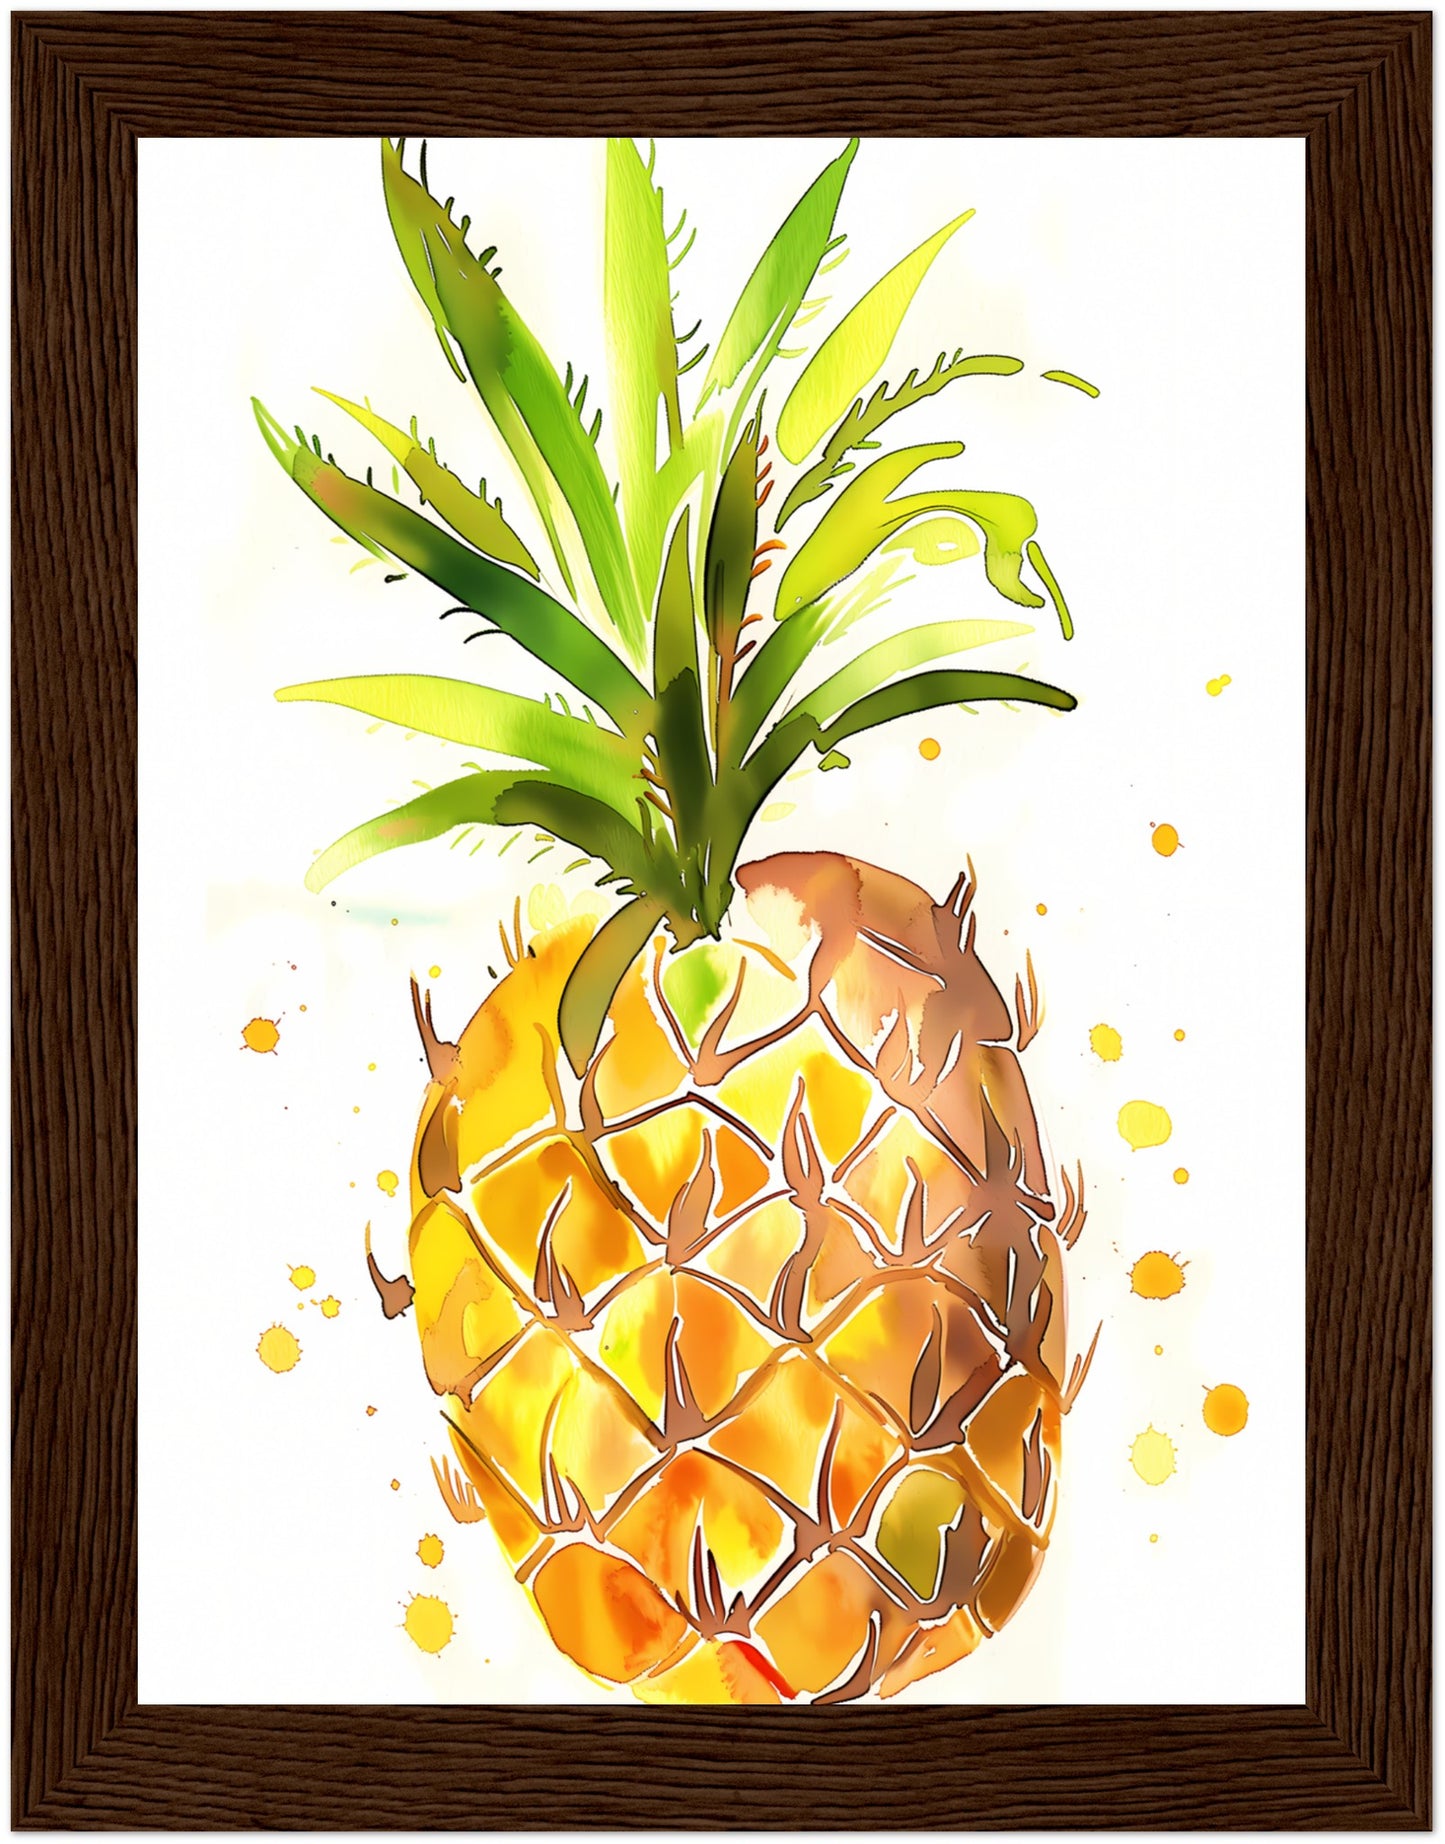 Watercolor painting of a pineapple with paint splatters around it.